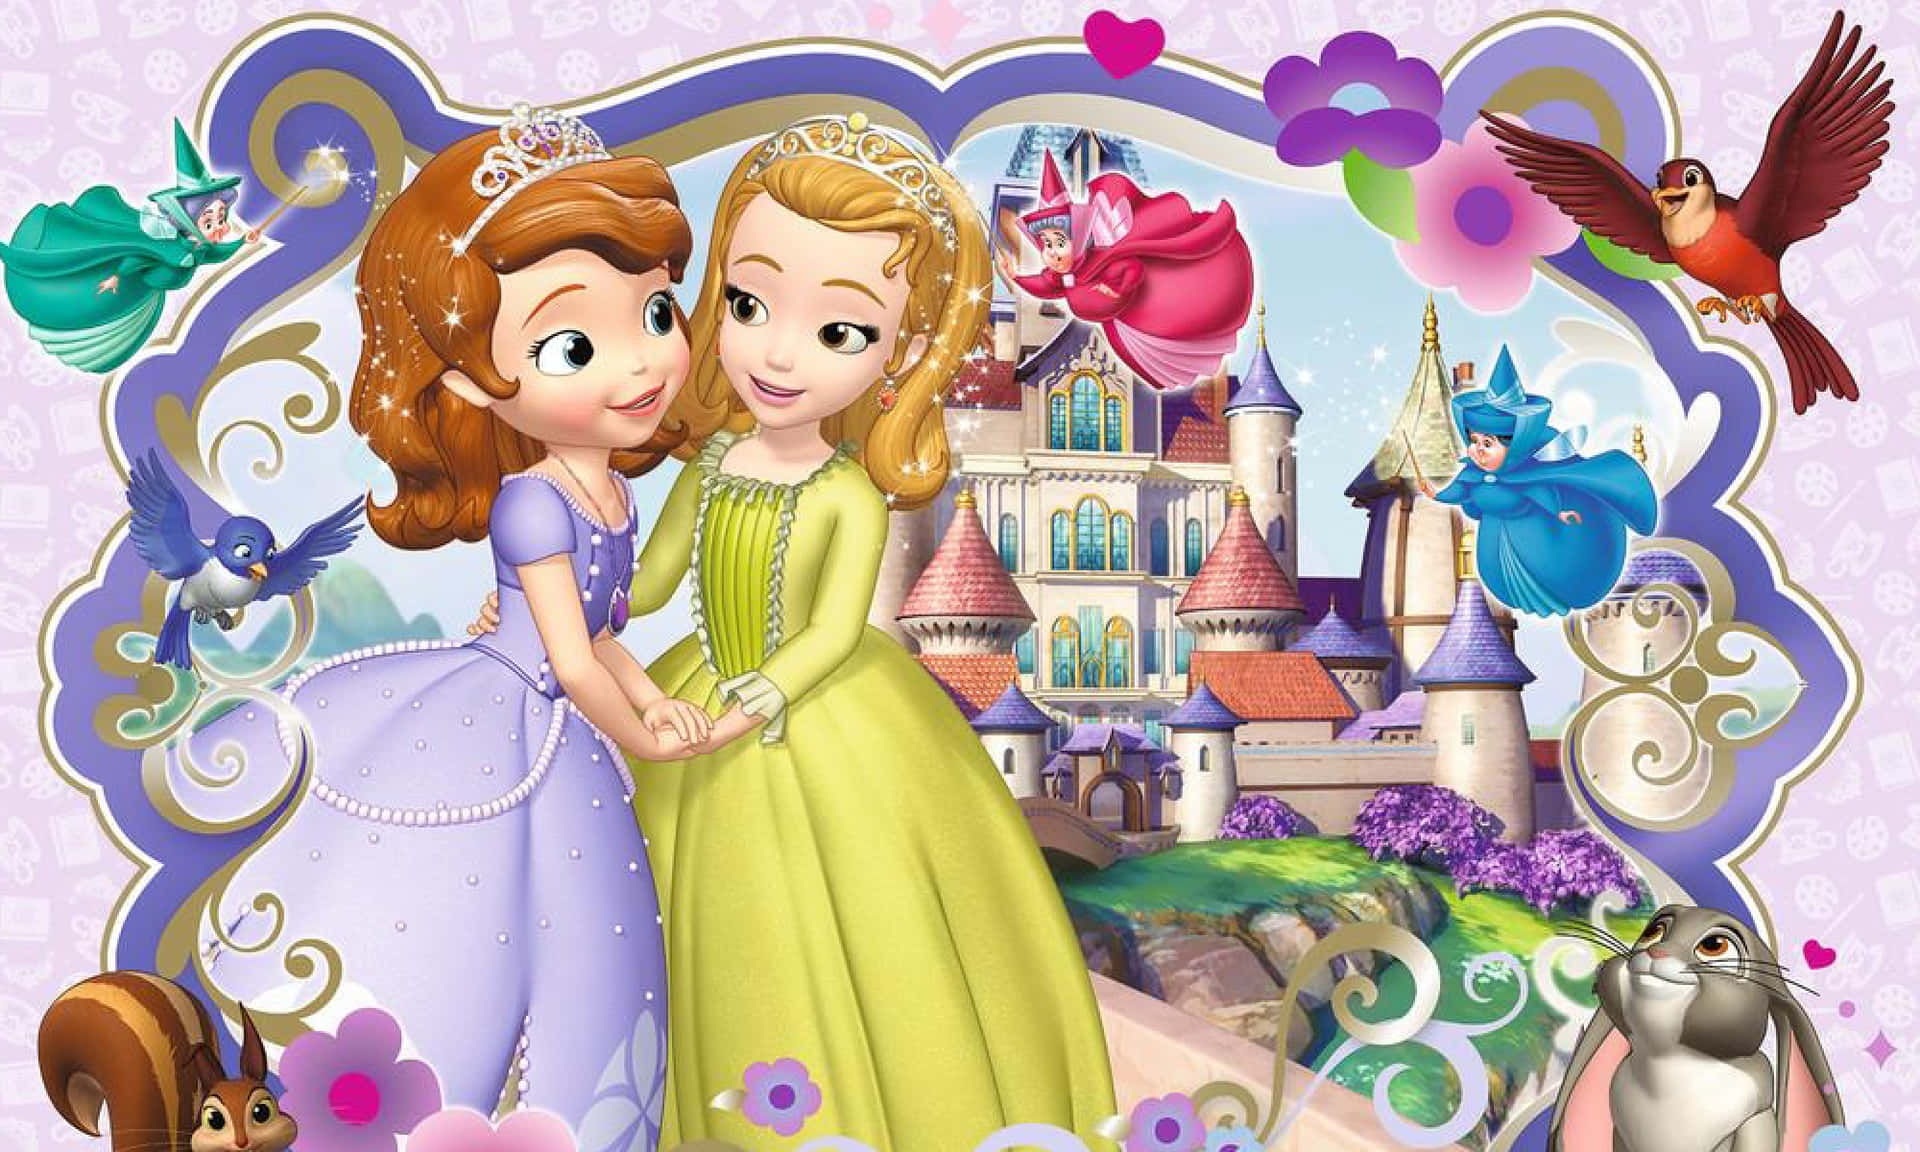 The Princess Adventure Continues with Sofia the First Wallpaper